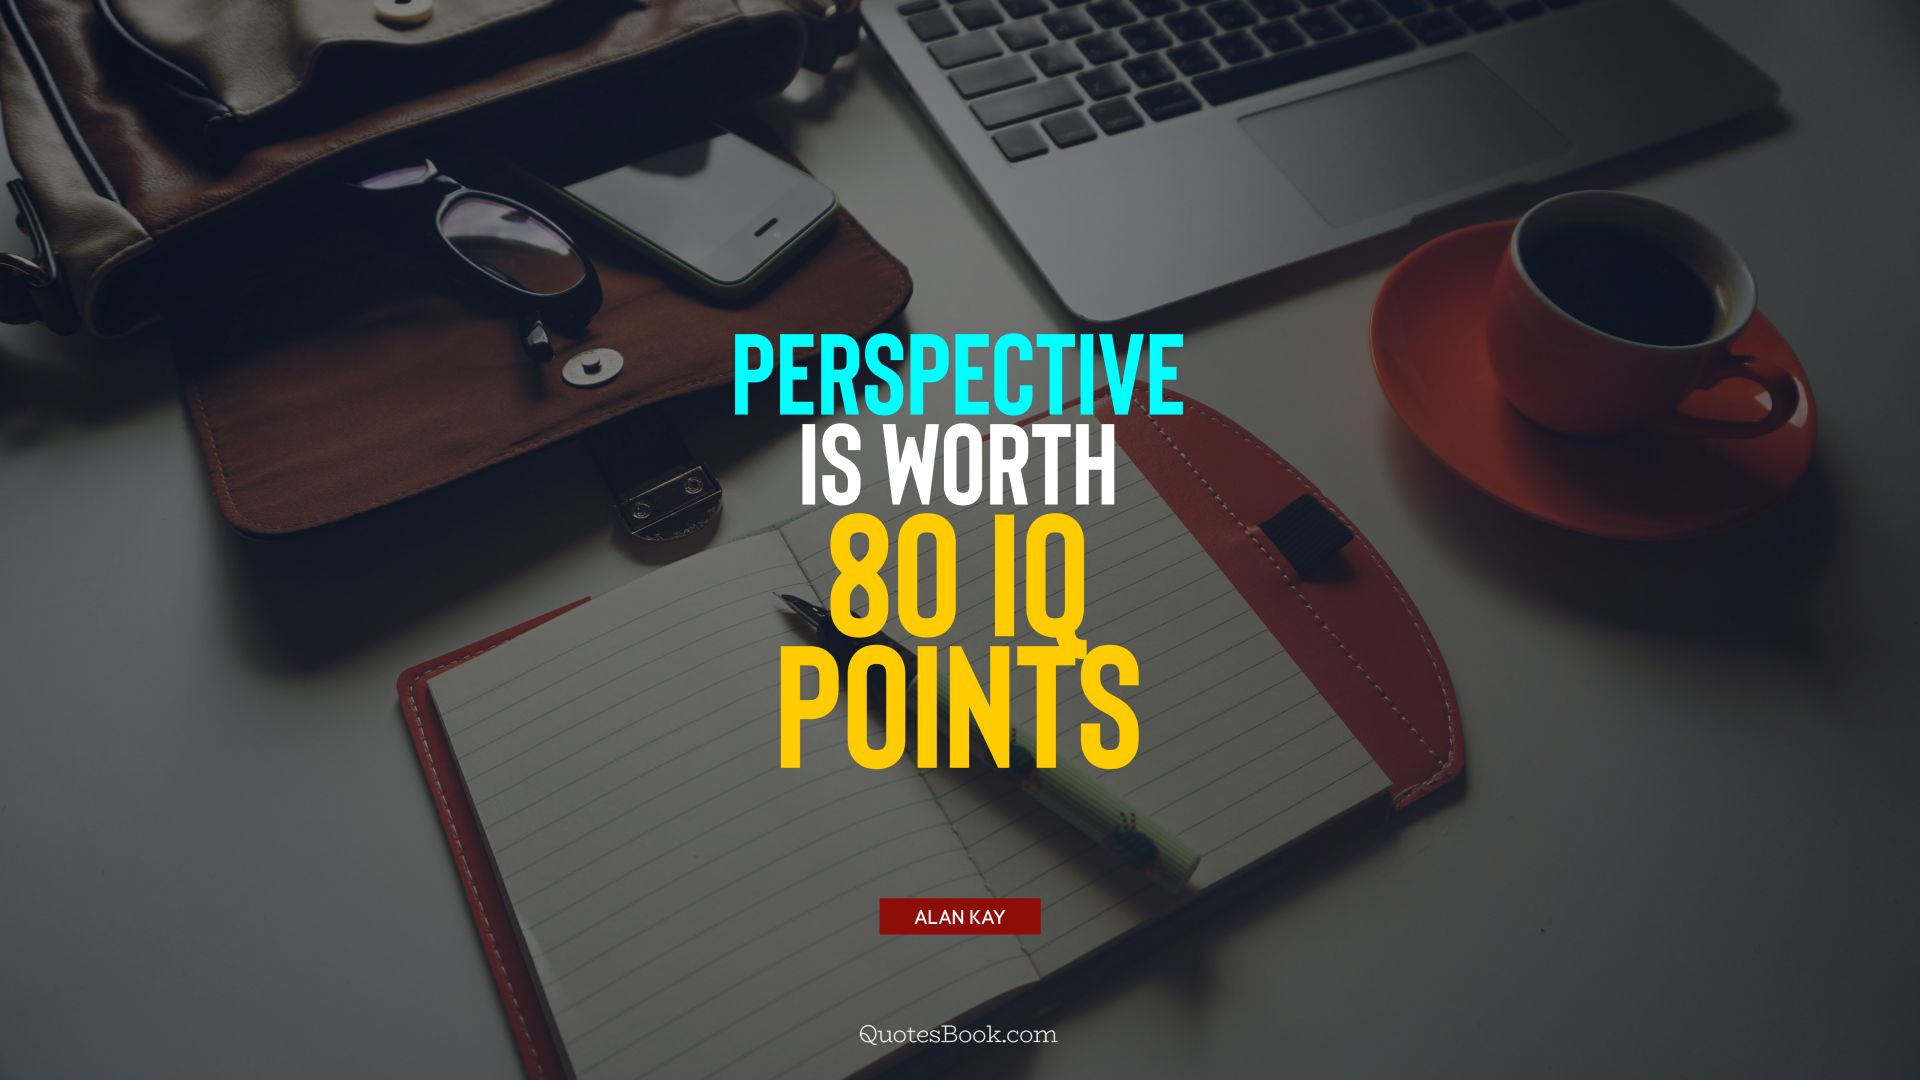 Perspective is worth 80 IQ points. - Quote by Alan Kay